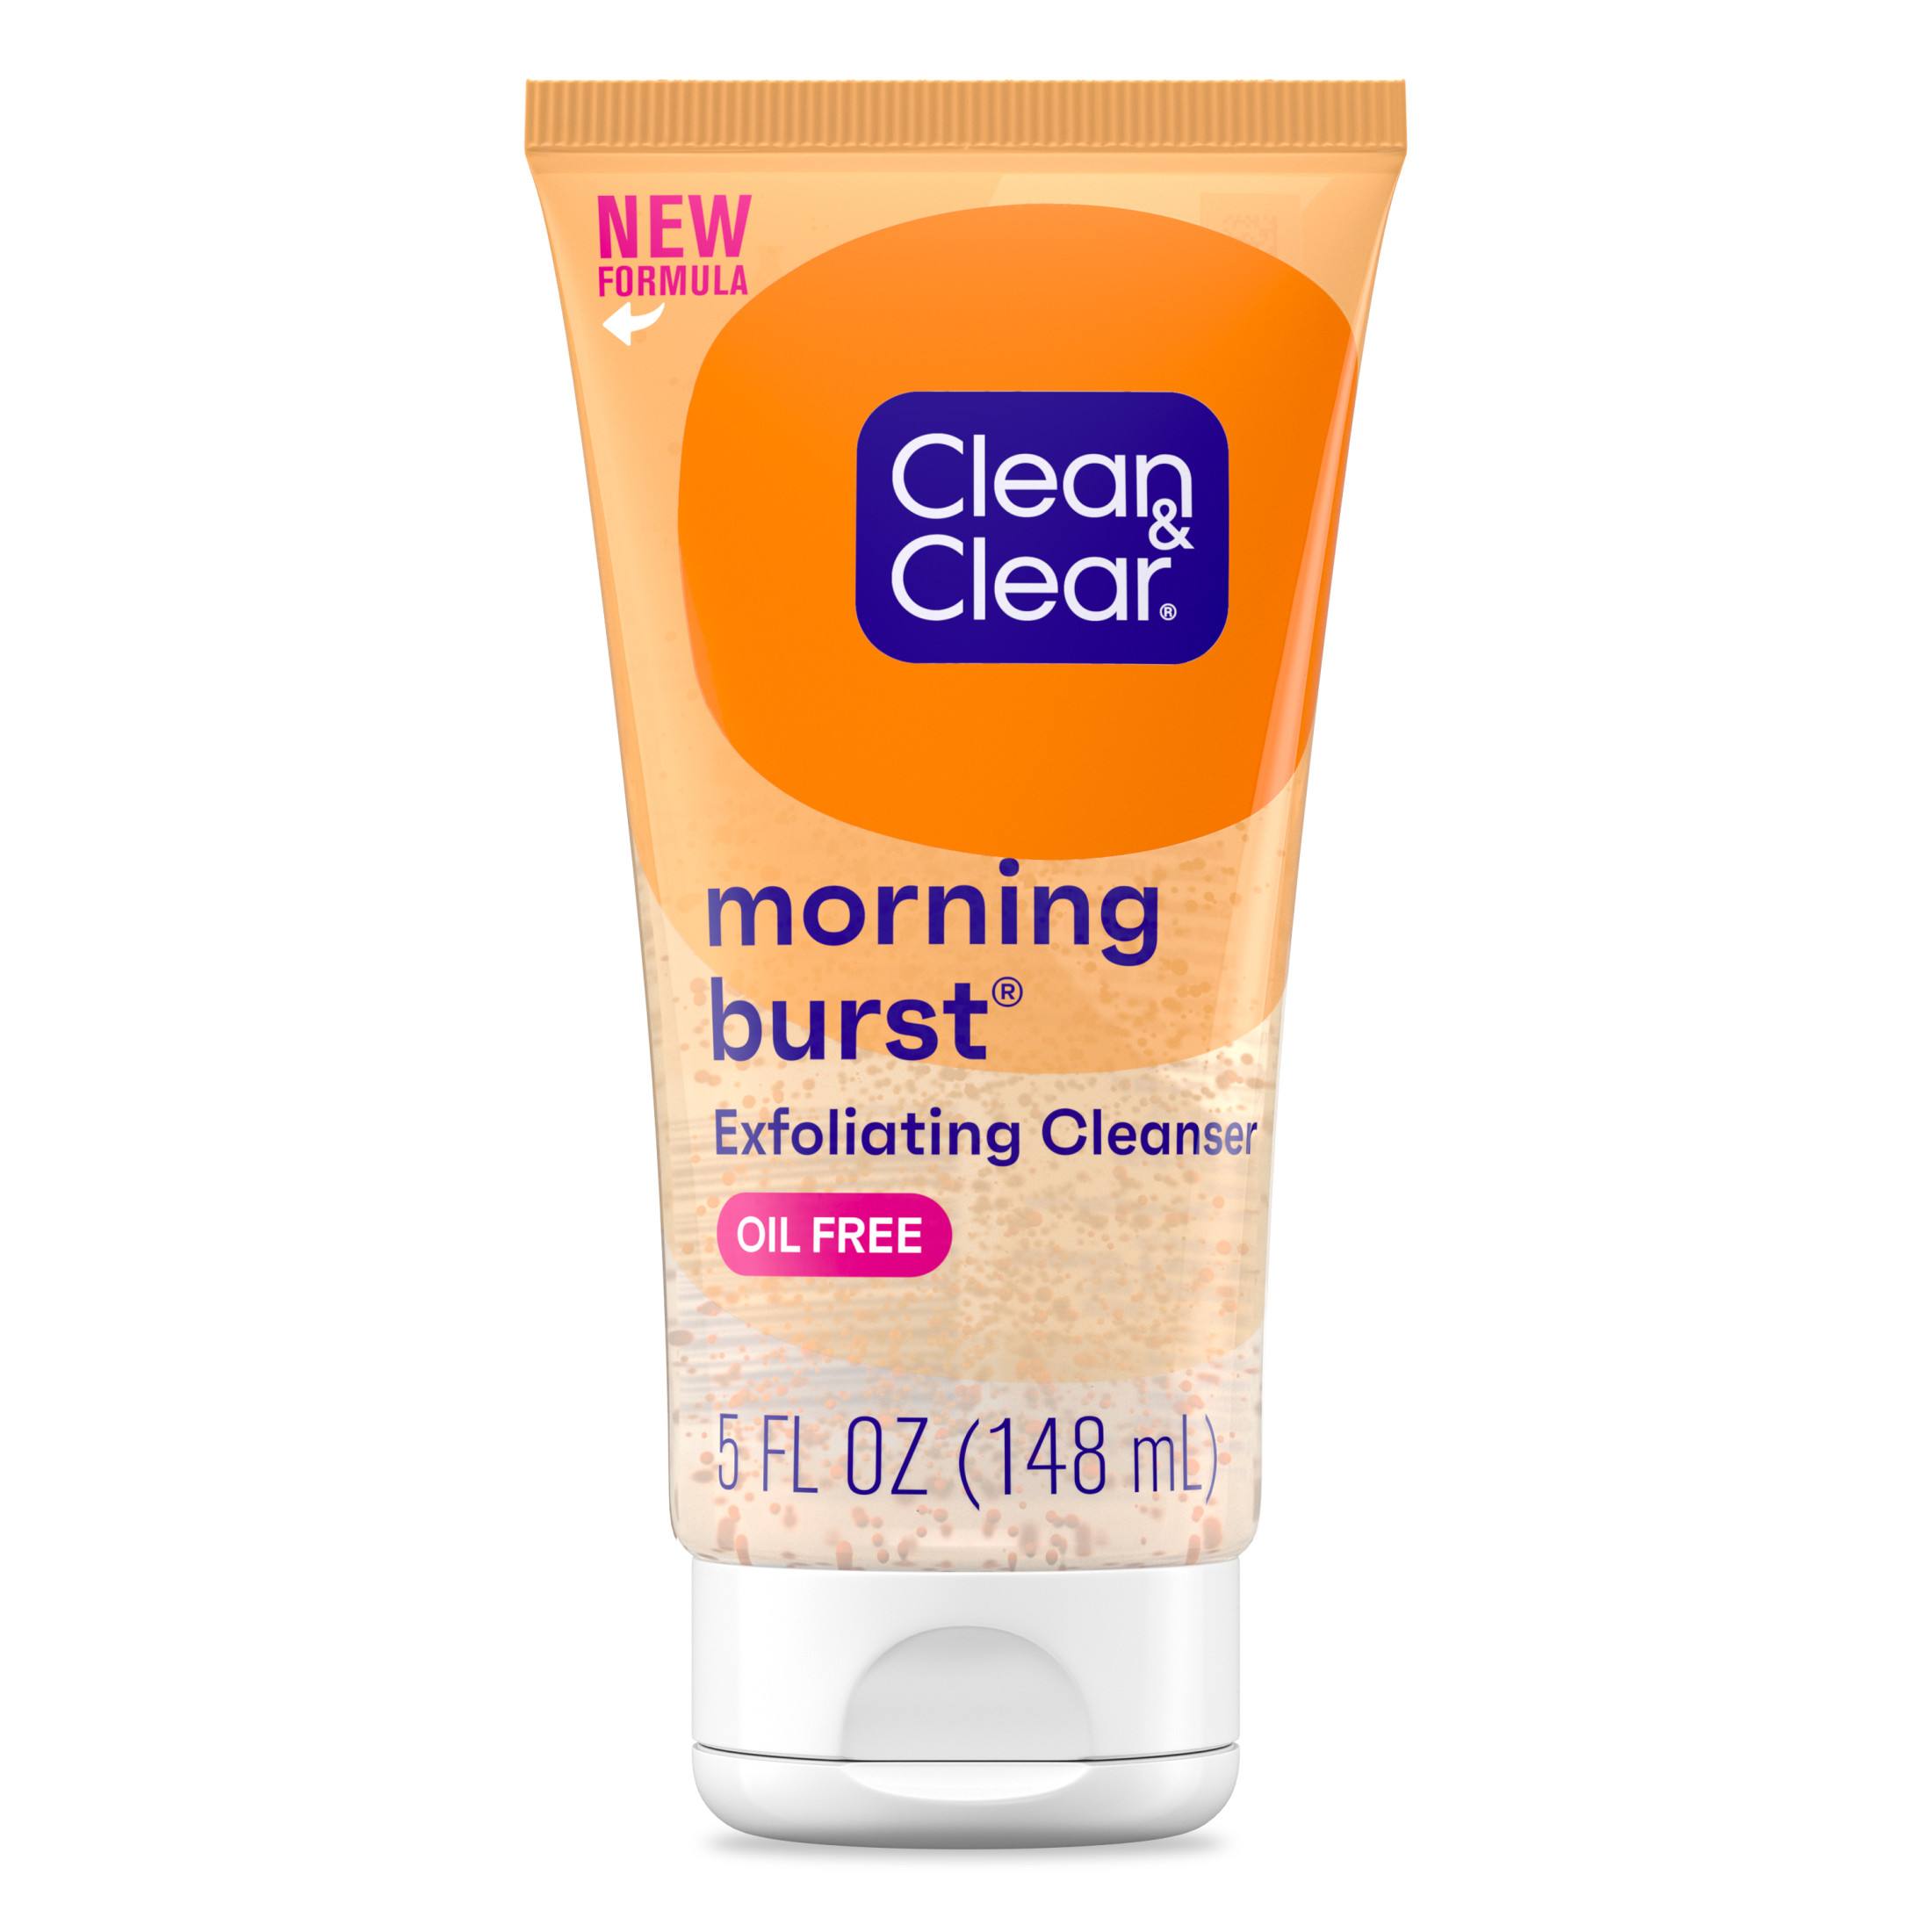 Clean & Clear Morning Burst Oil-Free Exfoliating Face Scrub, 5 oz - image 1 of 8